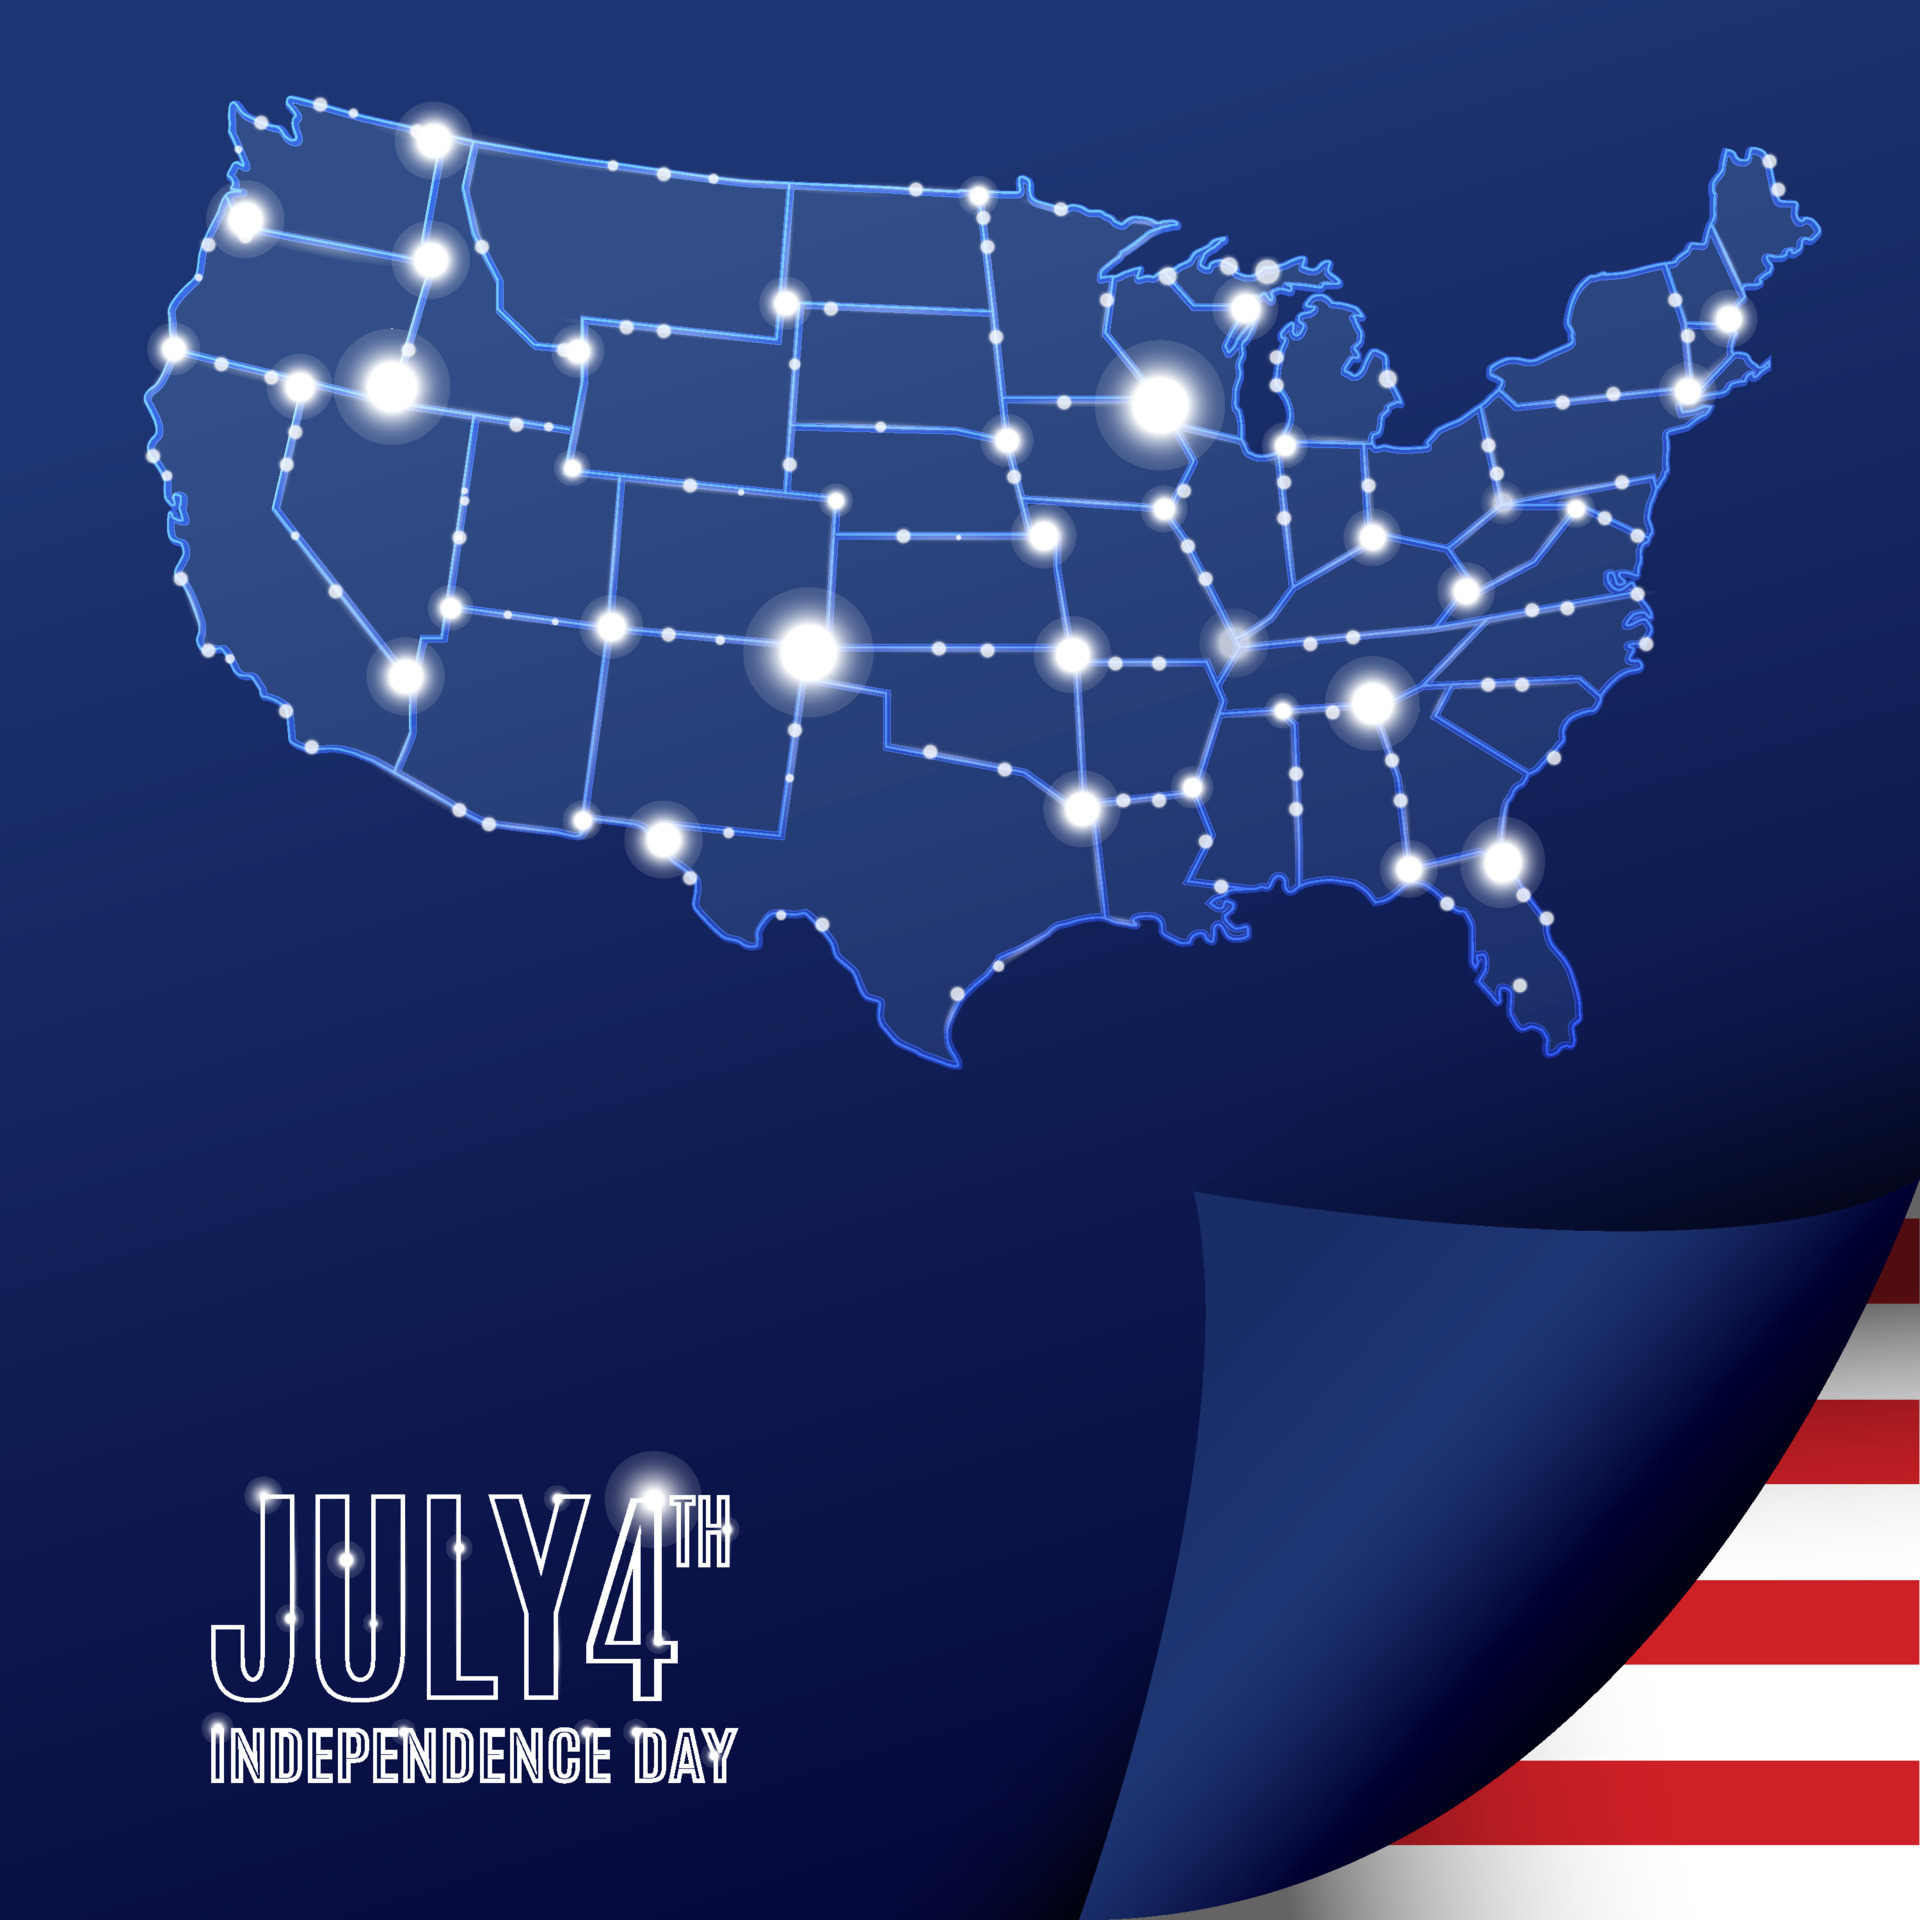 united-states-of-america-usa-map-outline-with-stars-and-lines-abstract